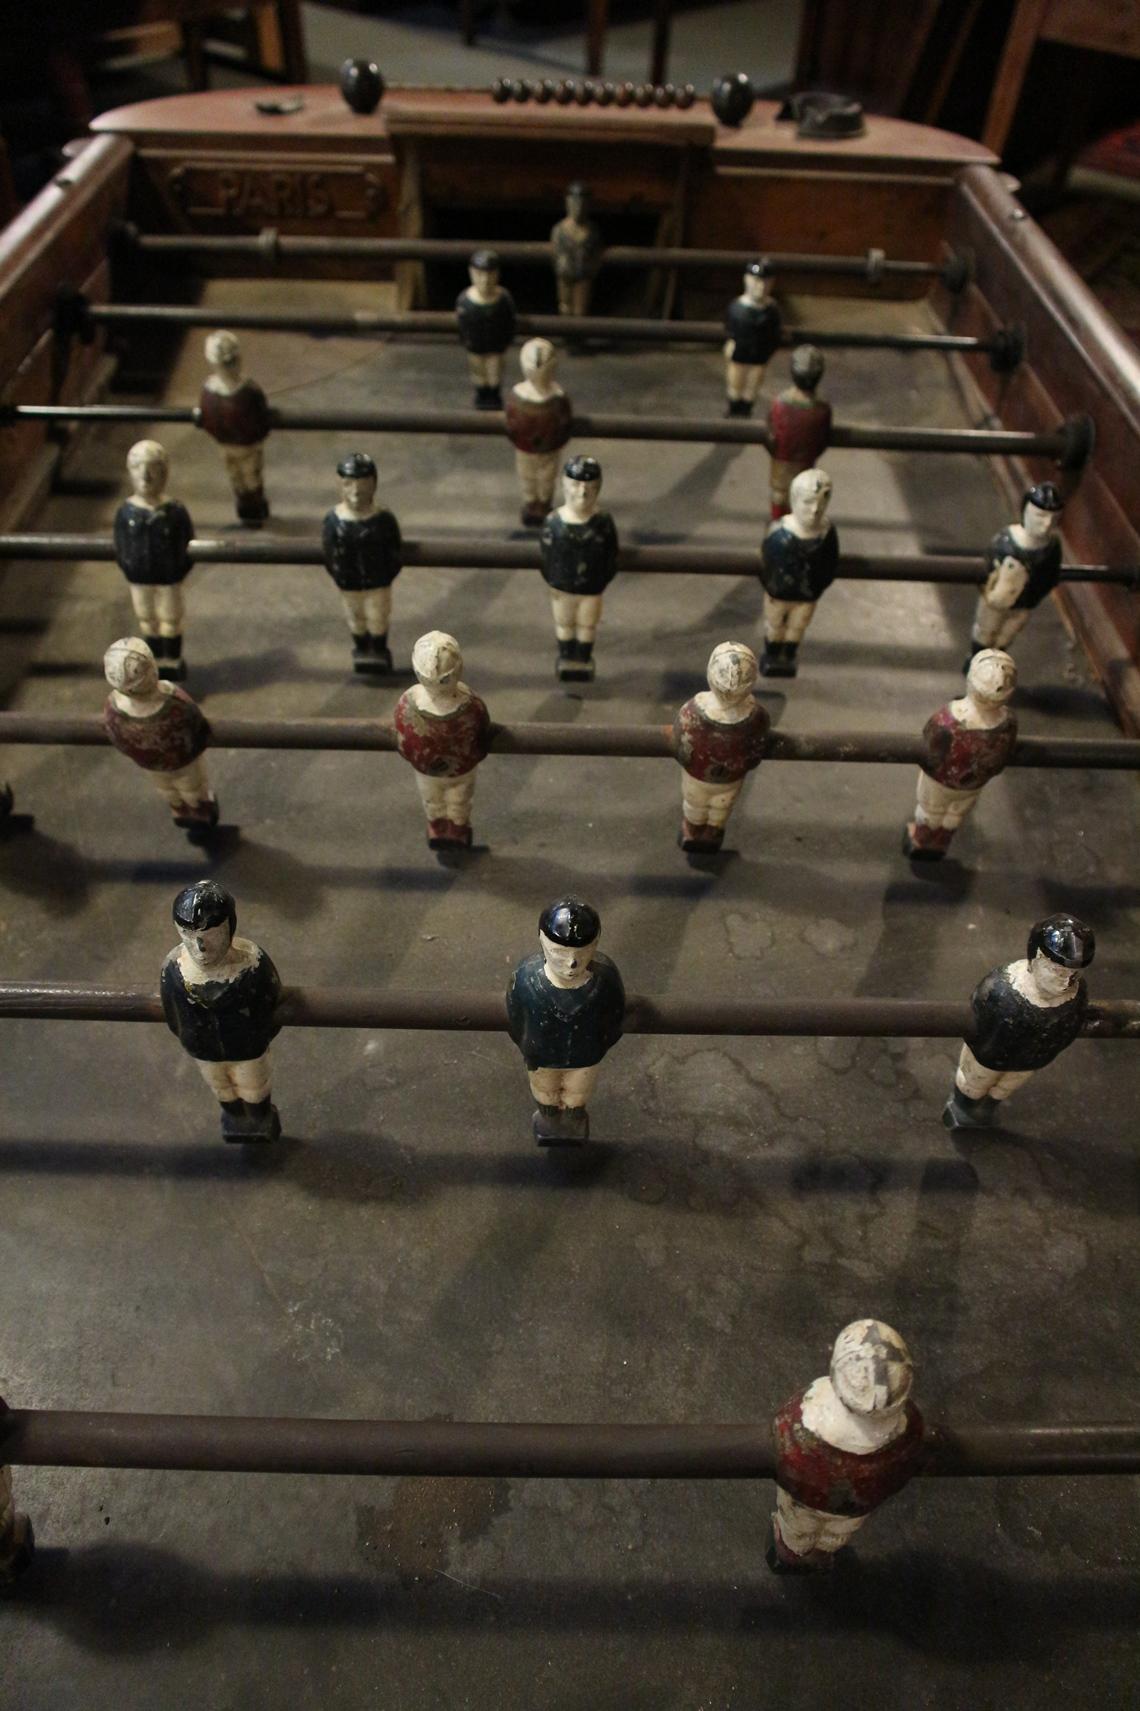 1930s Art Deco French Cafe Foosball Table or Football Table 8